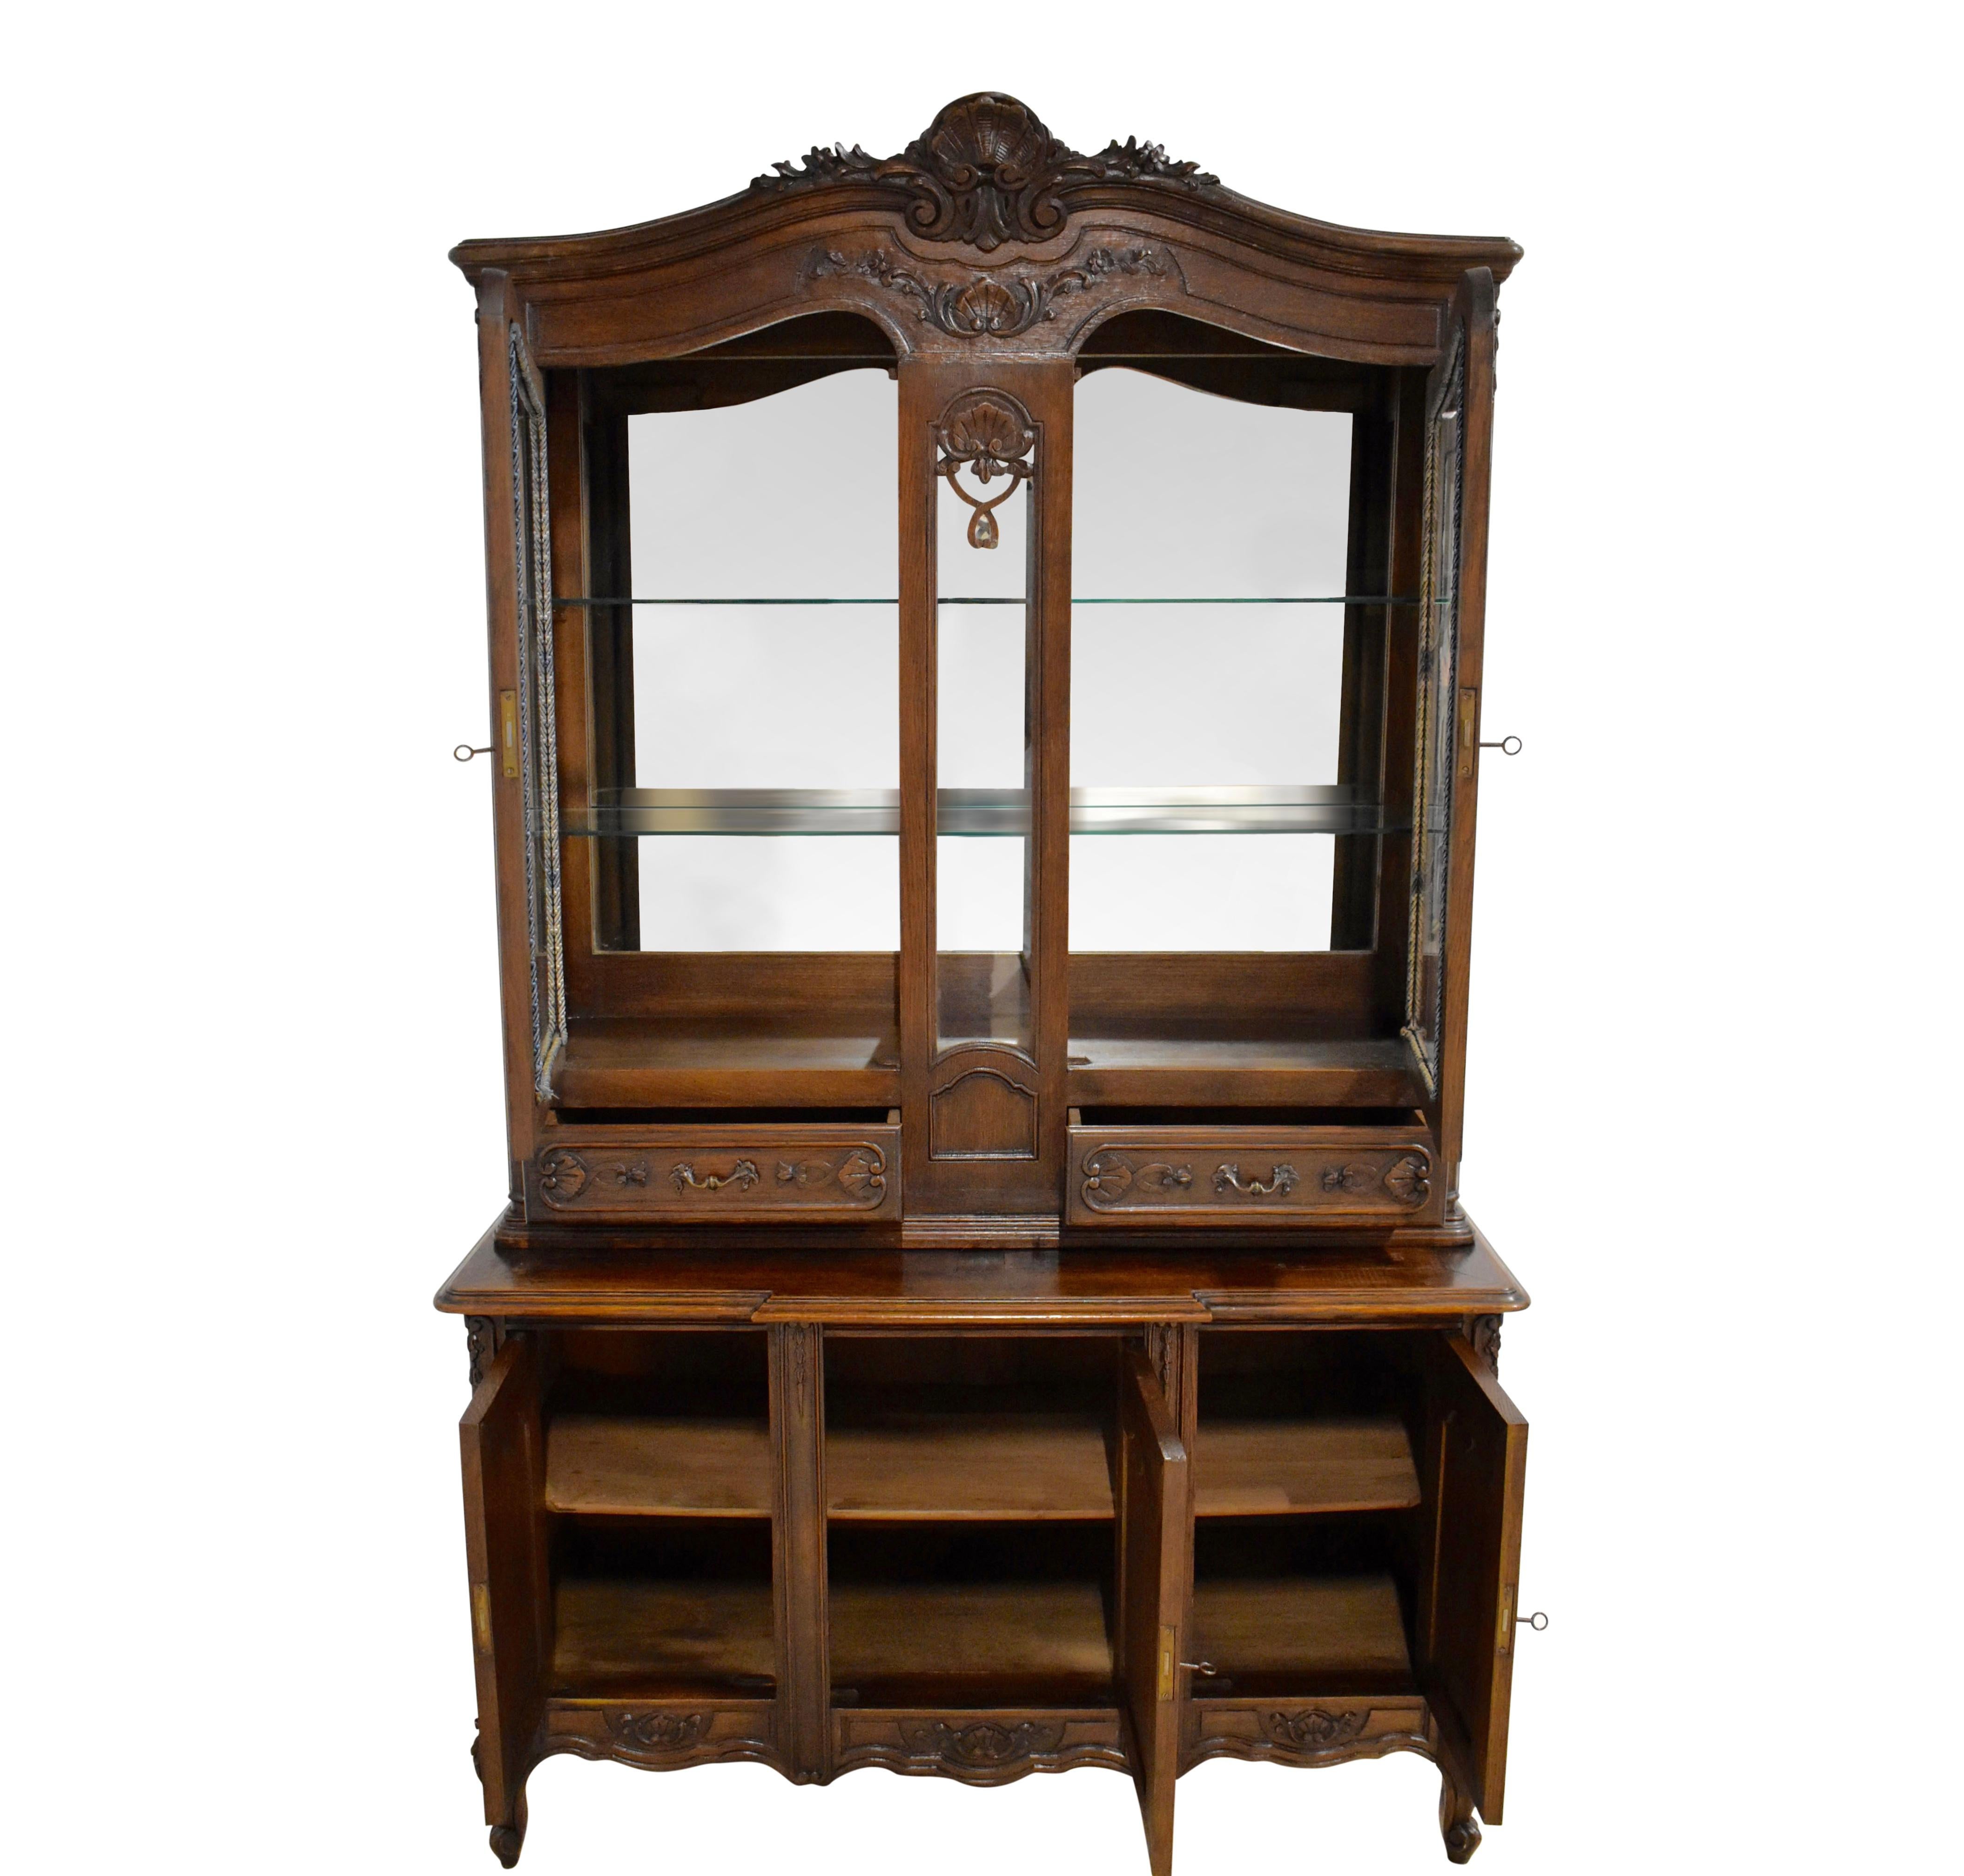 Generous storage and a delightful display case are paired in this remarkable Louis XV vitrine hutch. Crafted from beautiful European oak at the beginning of the twentieth century, the hutch is carved with shells, flowers, and scrolled acanthus